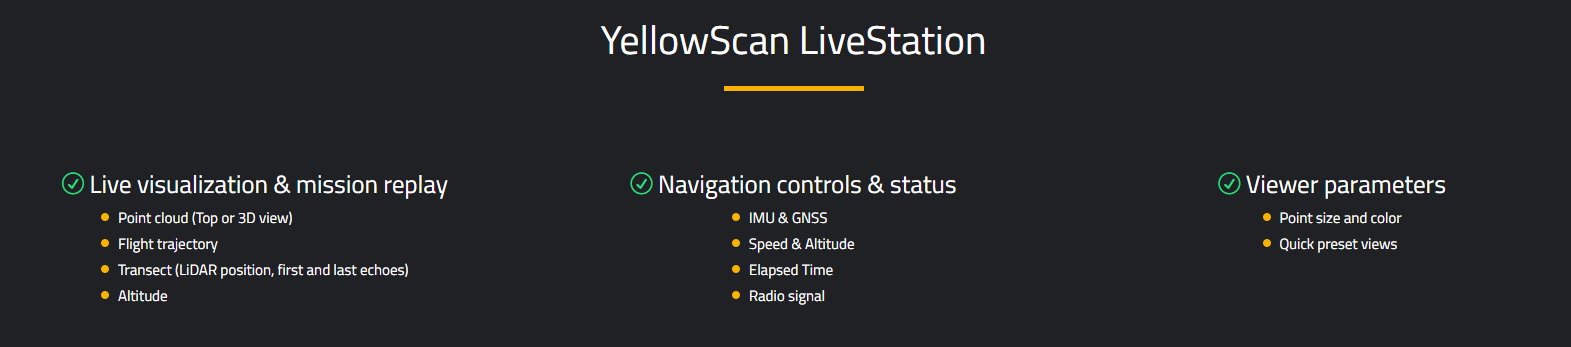 YellowScan LiveStation Features